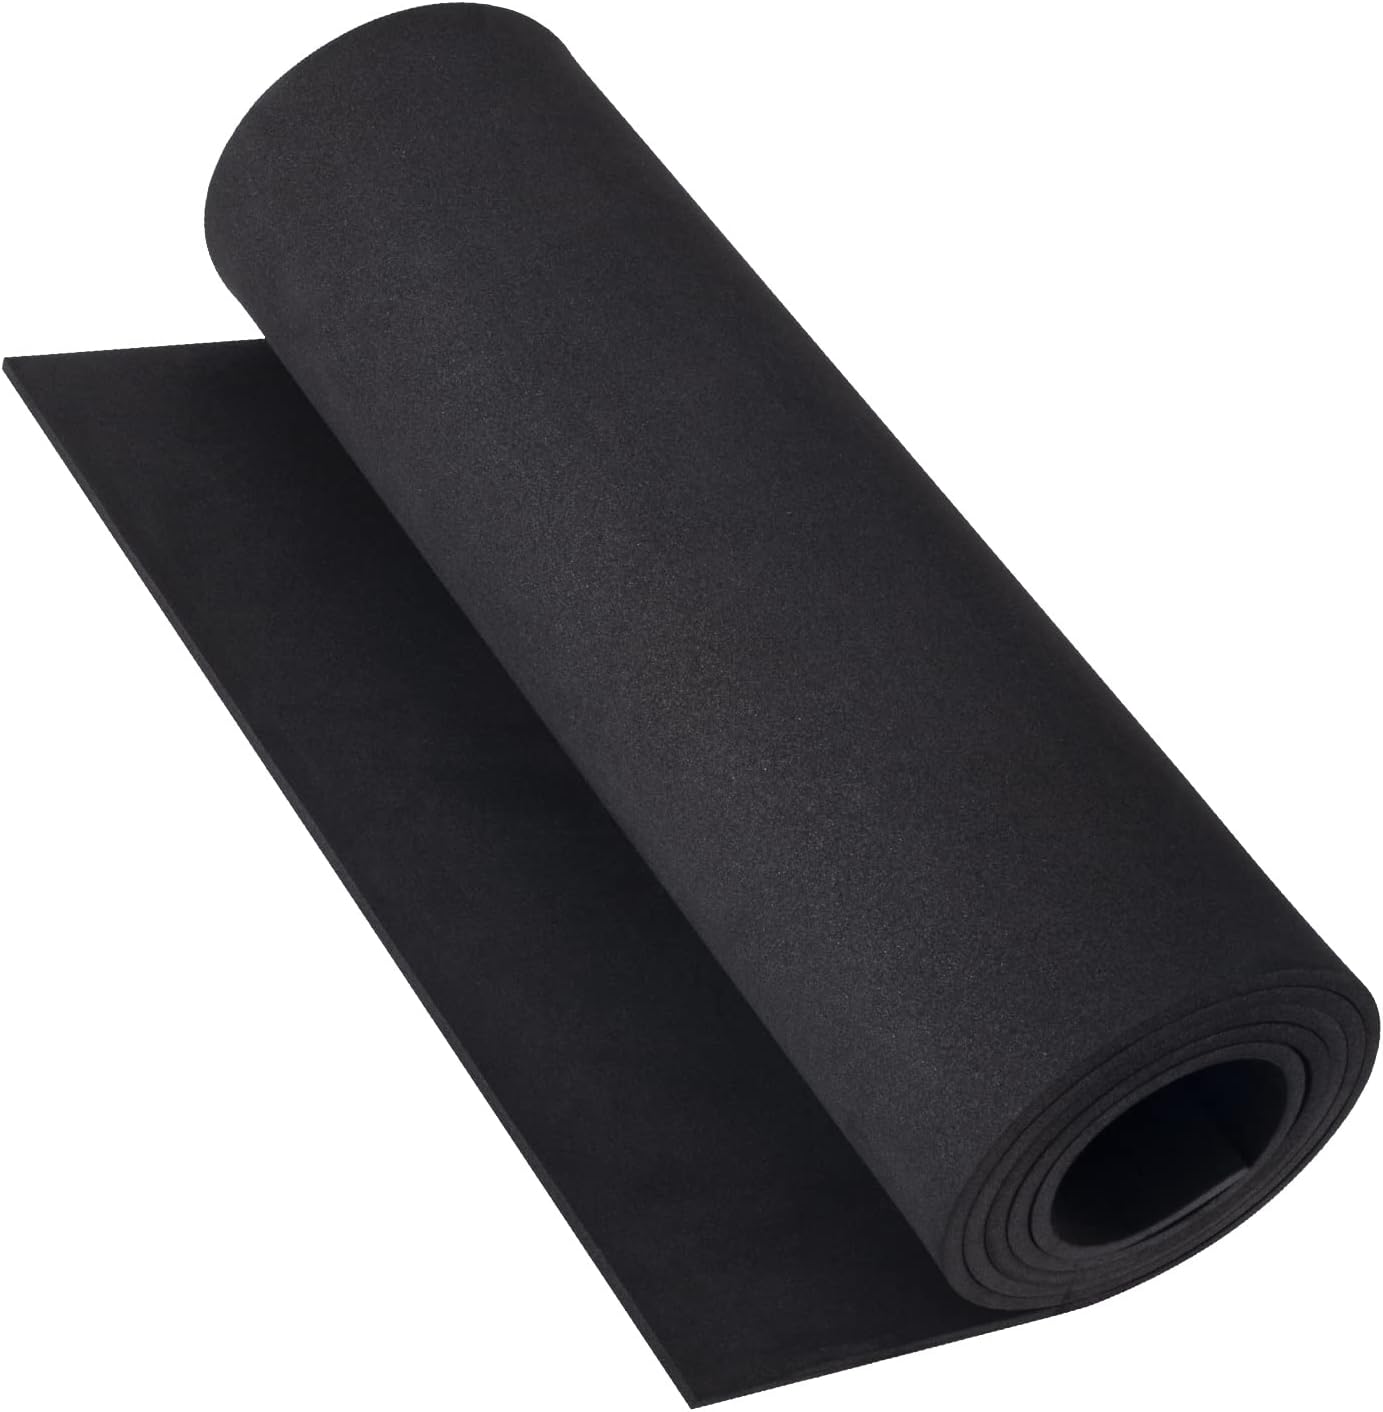 Black Foam Sheets Roll, Premium Cosplay EVA Foam Sheet，4mm Thick,59"x13.9",High Density 86kg/m3 for Cosplay Costume, Crafts, DIY Projects by PAIDU